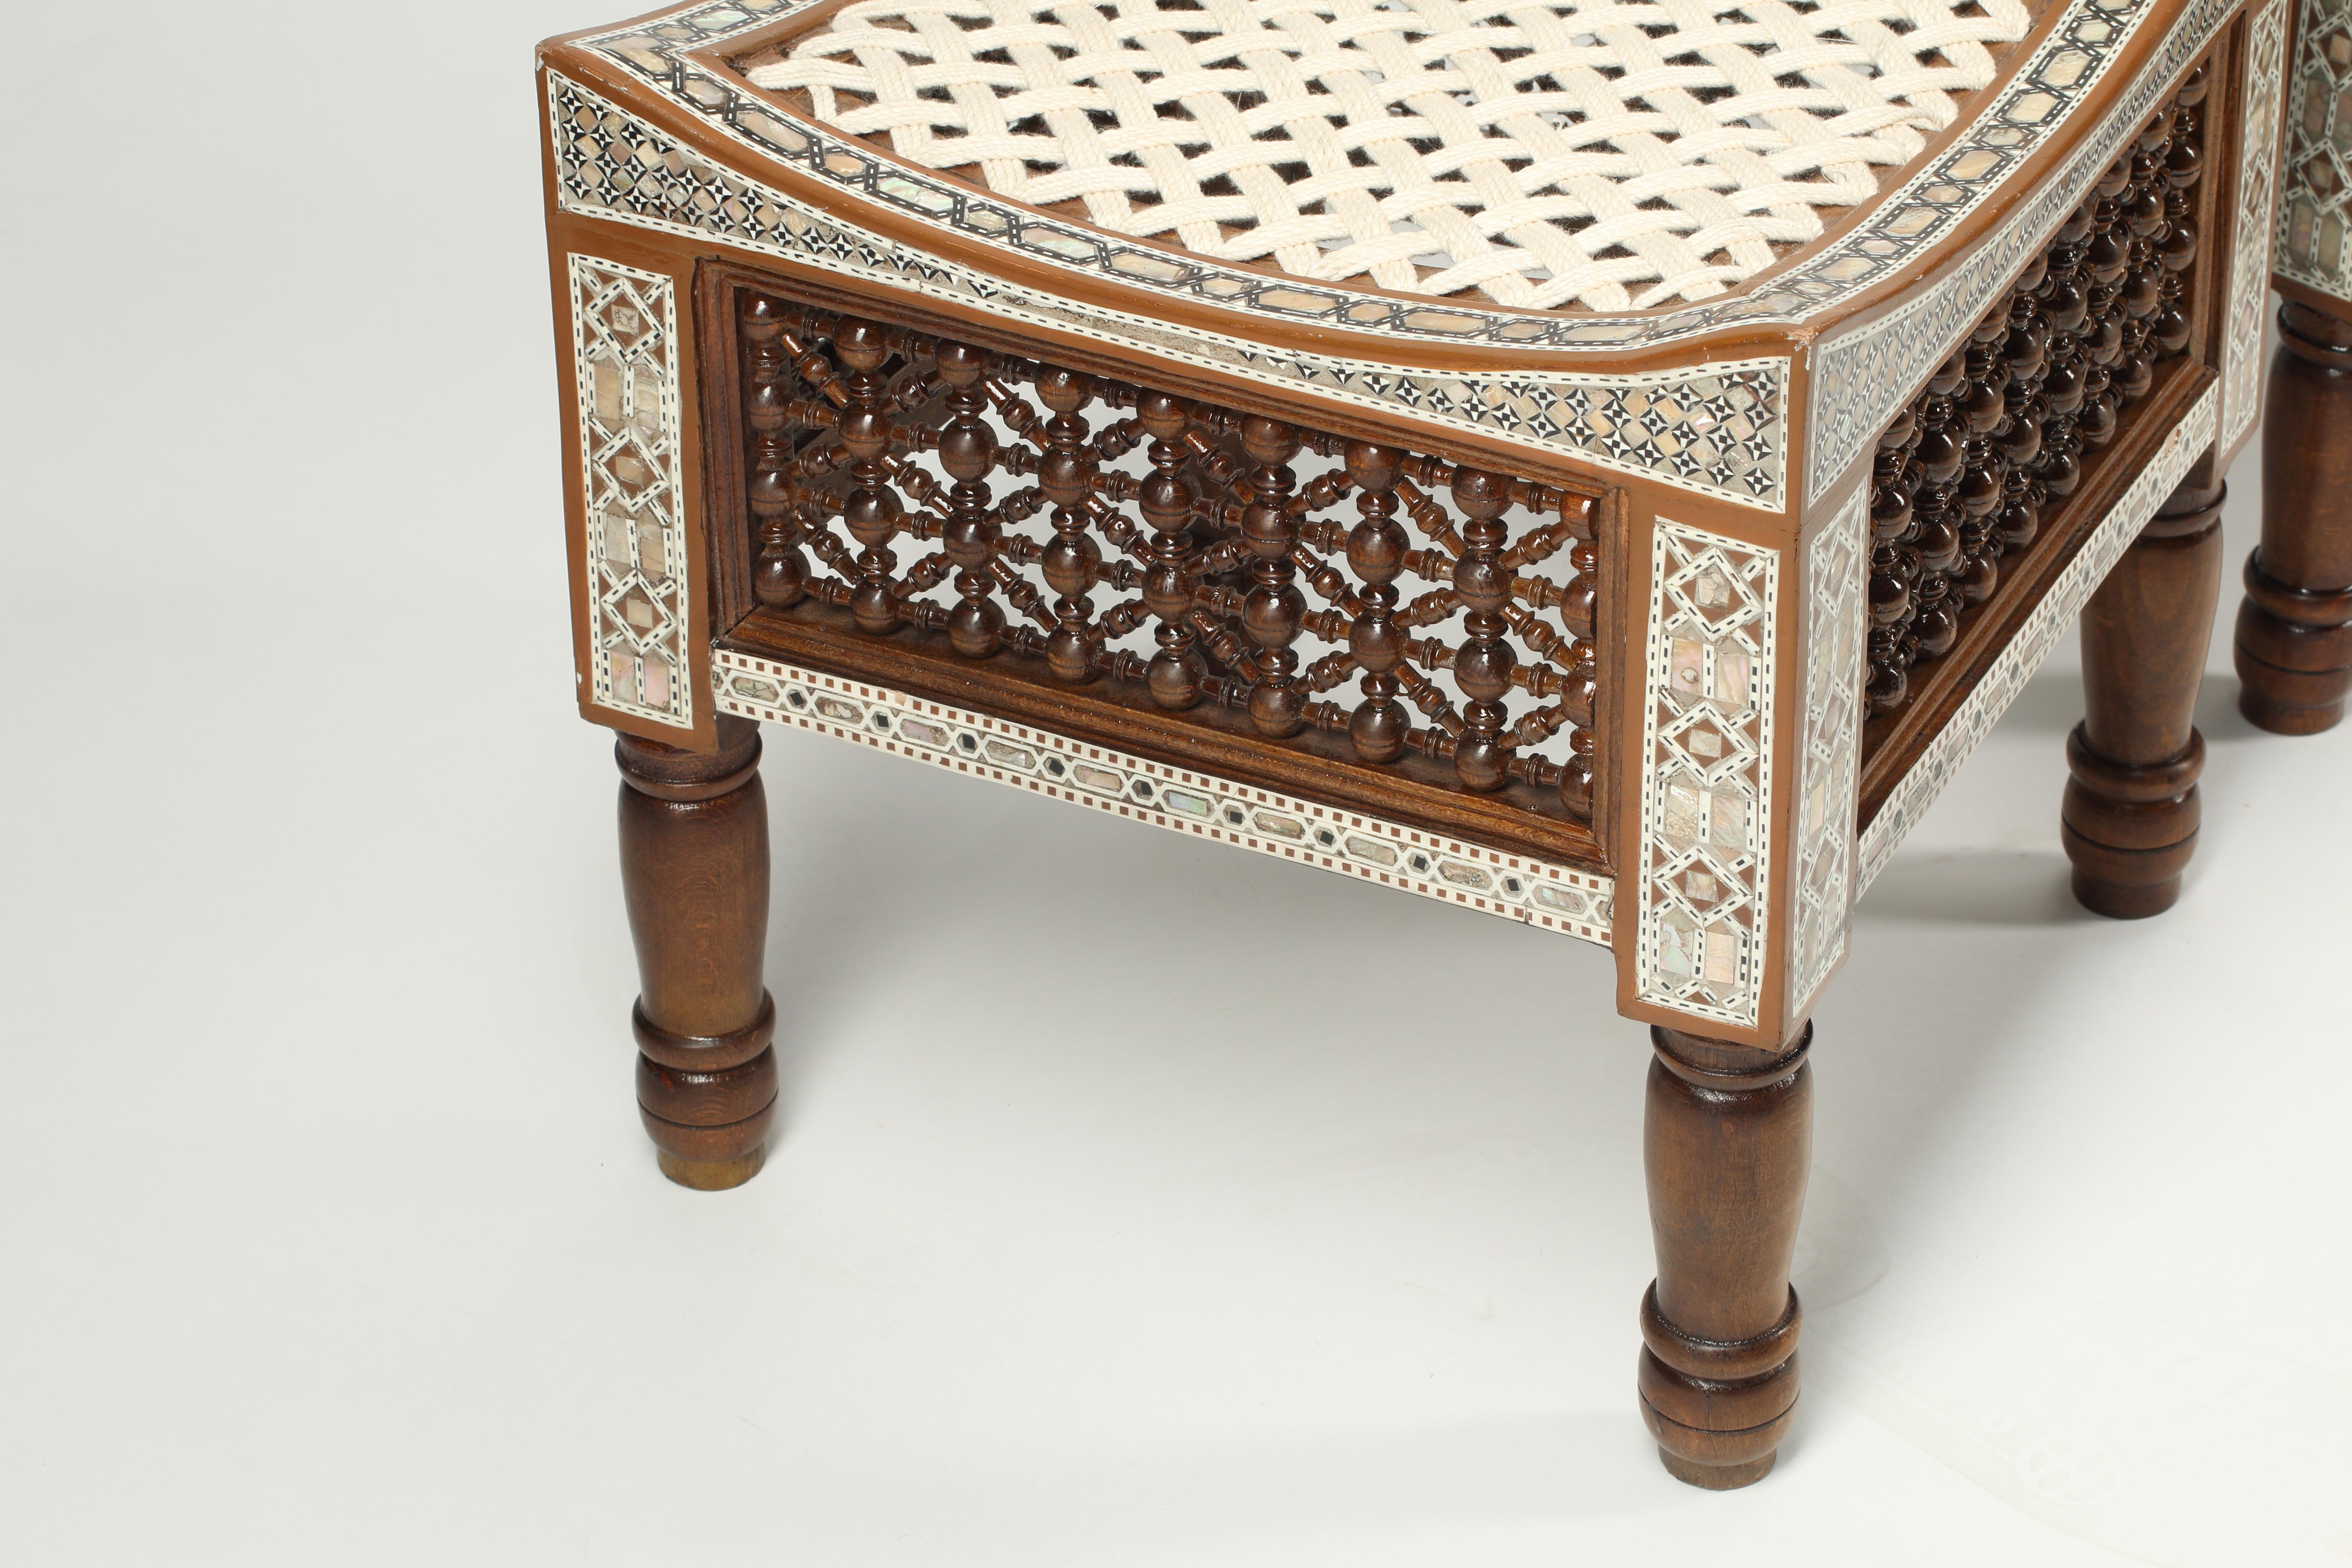 A set of four levantine mother of pearl inlay stools with carved wooden sides and legs. Curved seat frame on four turned legs united by stretchers, with interlaced rope seat.